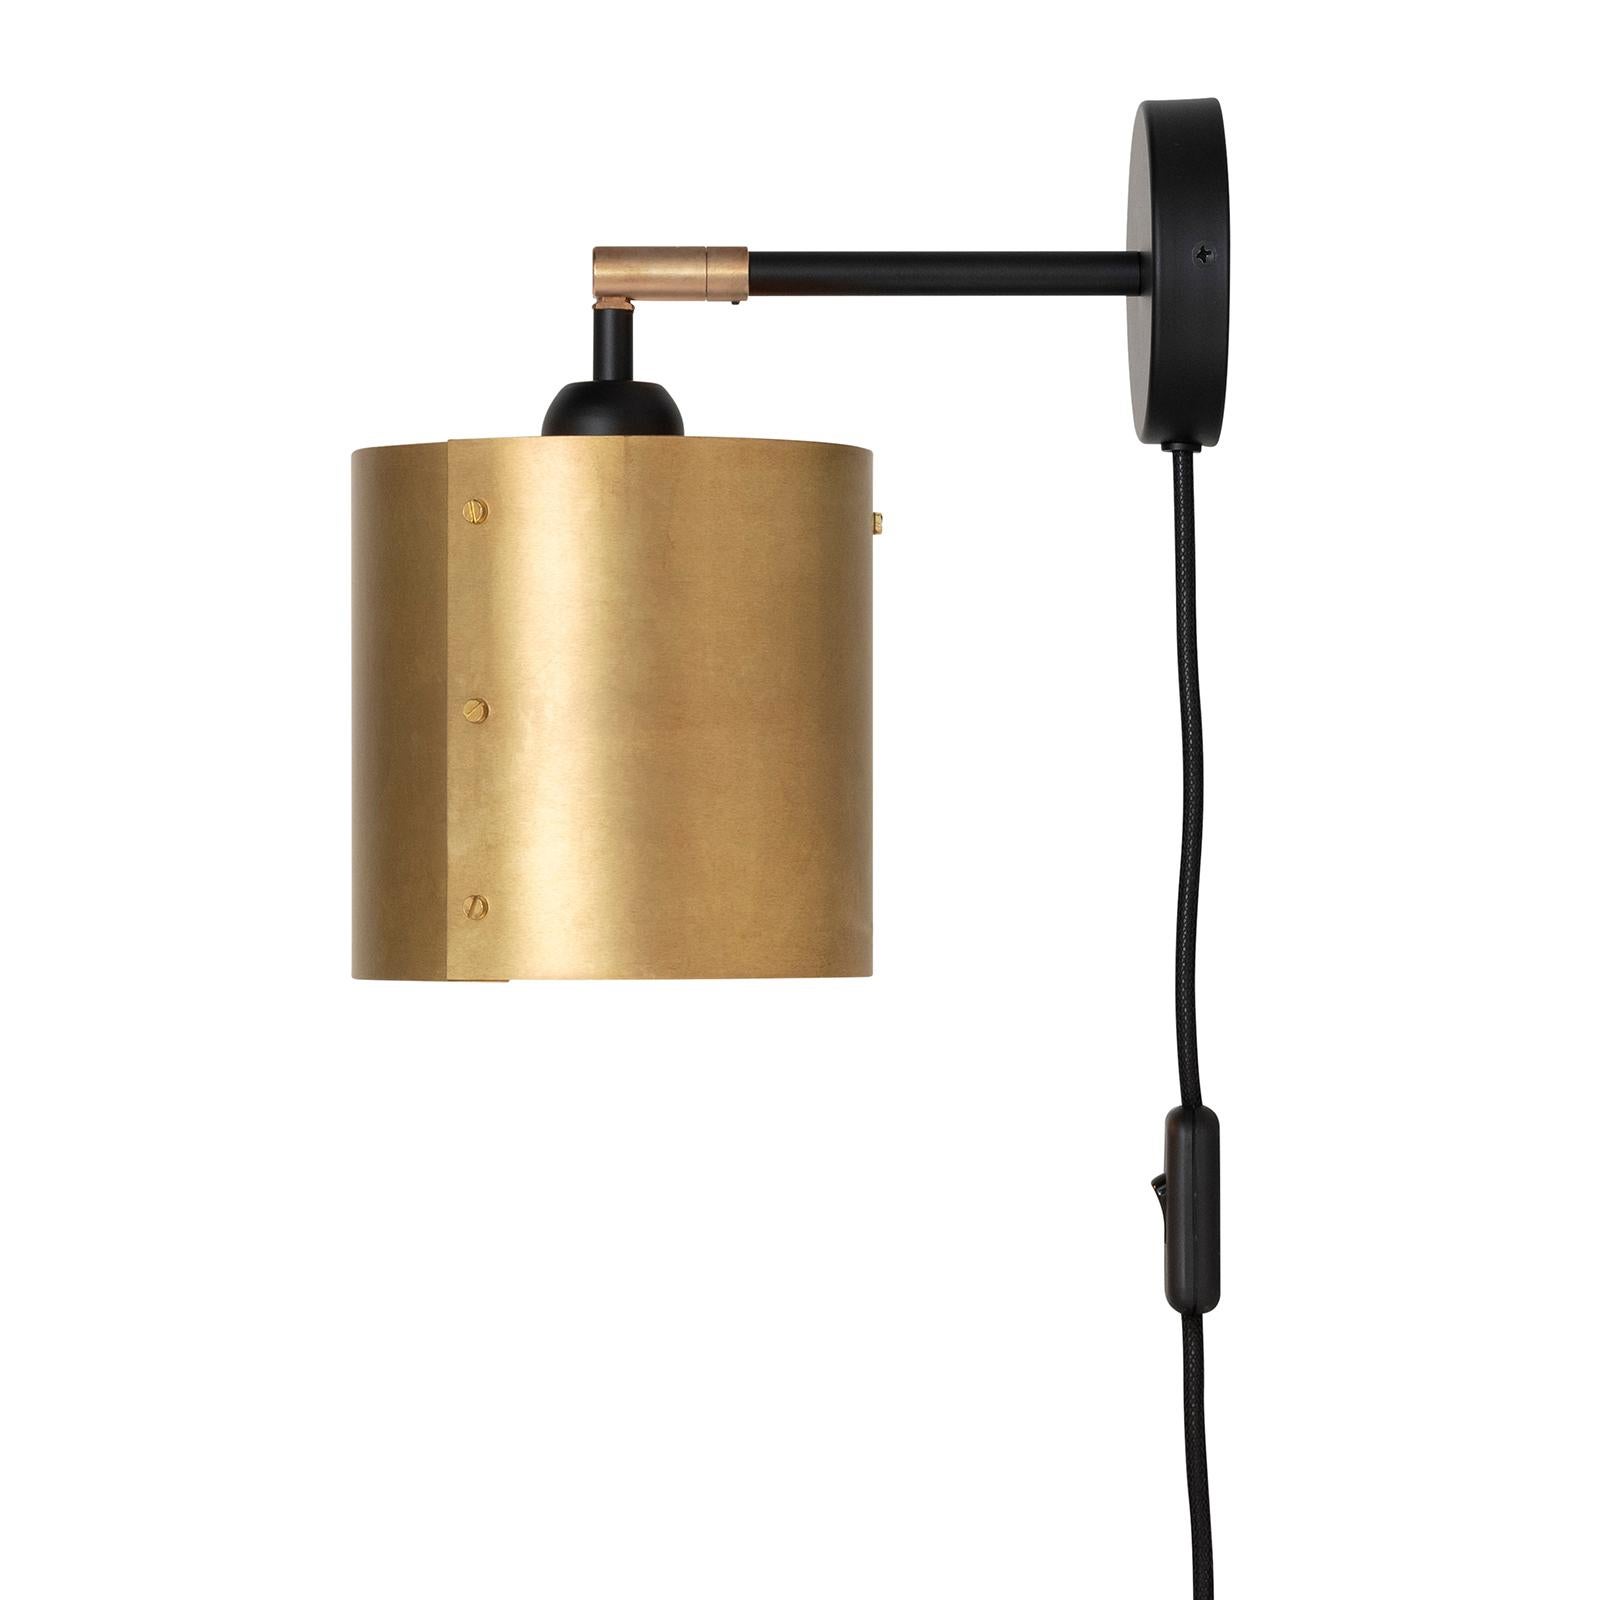 Wall lamp model Svep designed by Konsthantverk and manufactured by themselves. 

The production of lamps, wall lights and floor lamps are manufactured using craftsman’s techniques with the same materials and techniques as the first